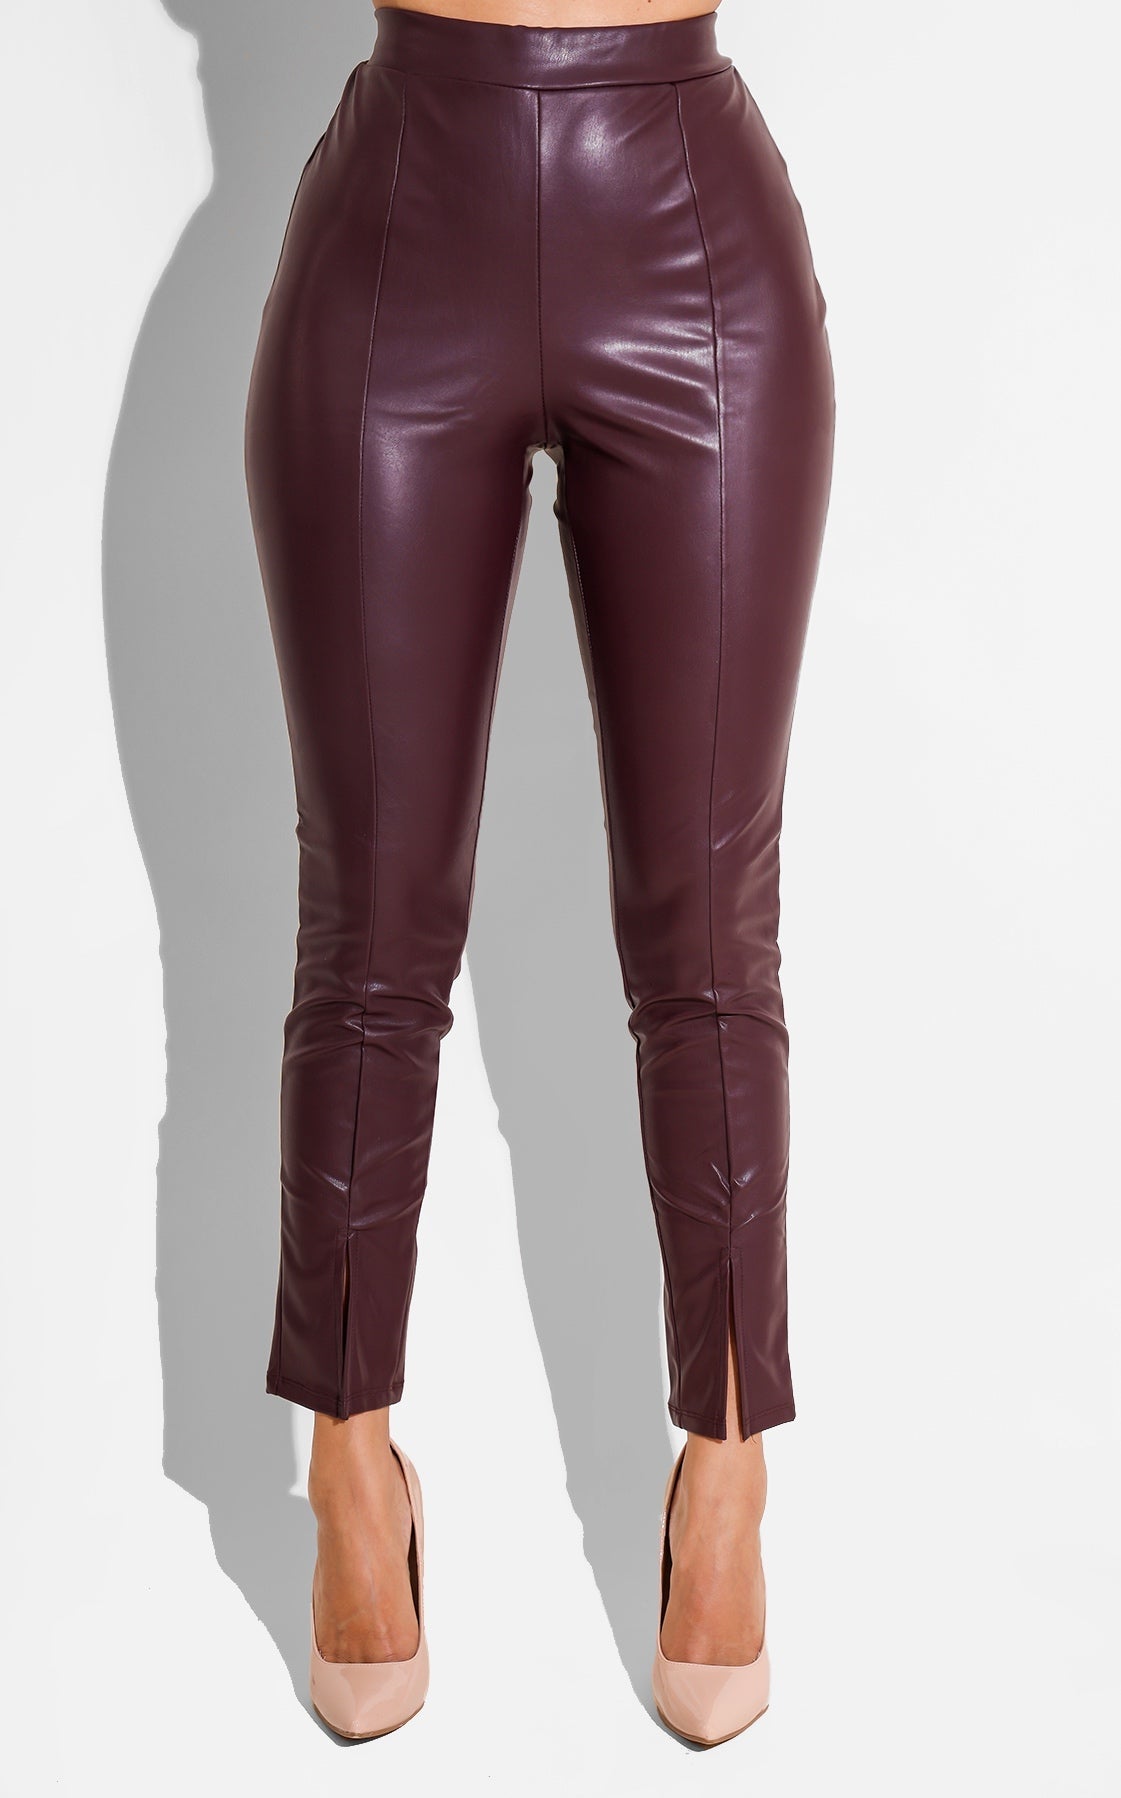 Off the Record Faux Leather Bottoms - Burgundy